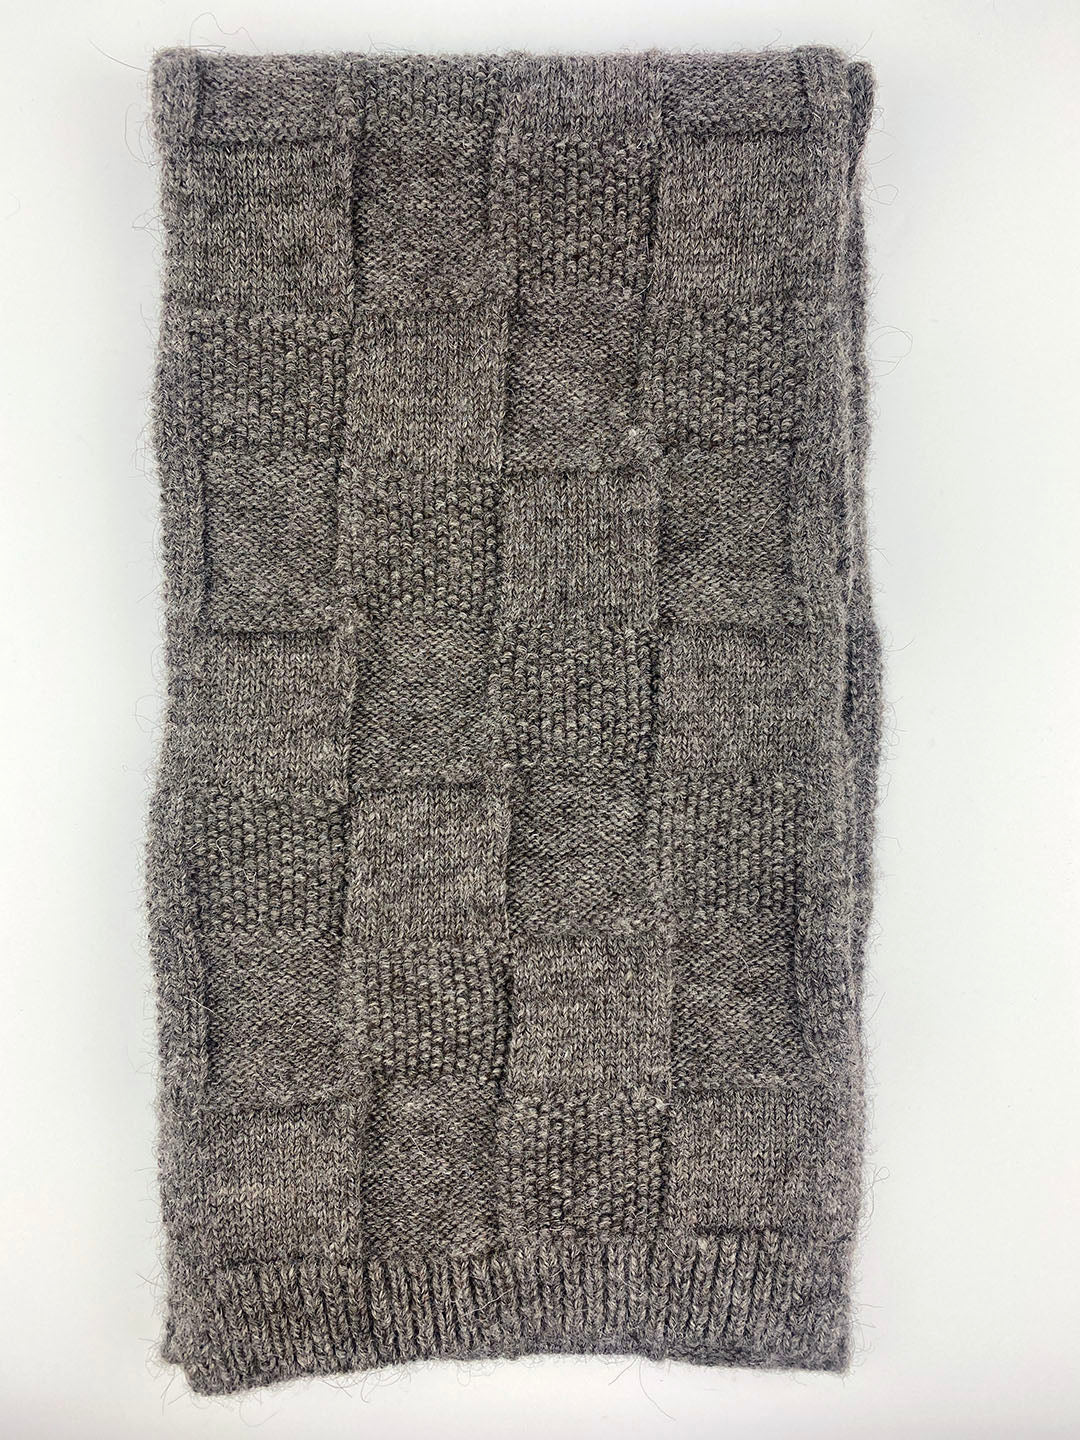 British wool Dentdale grey scarf knitted in Ayrshire